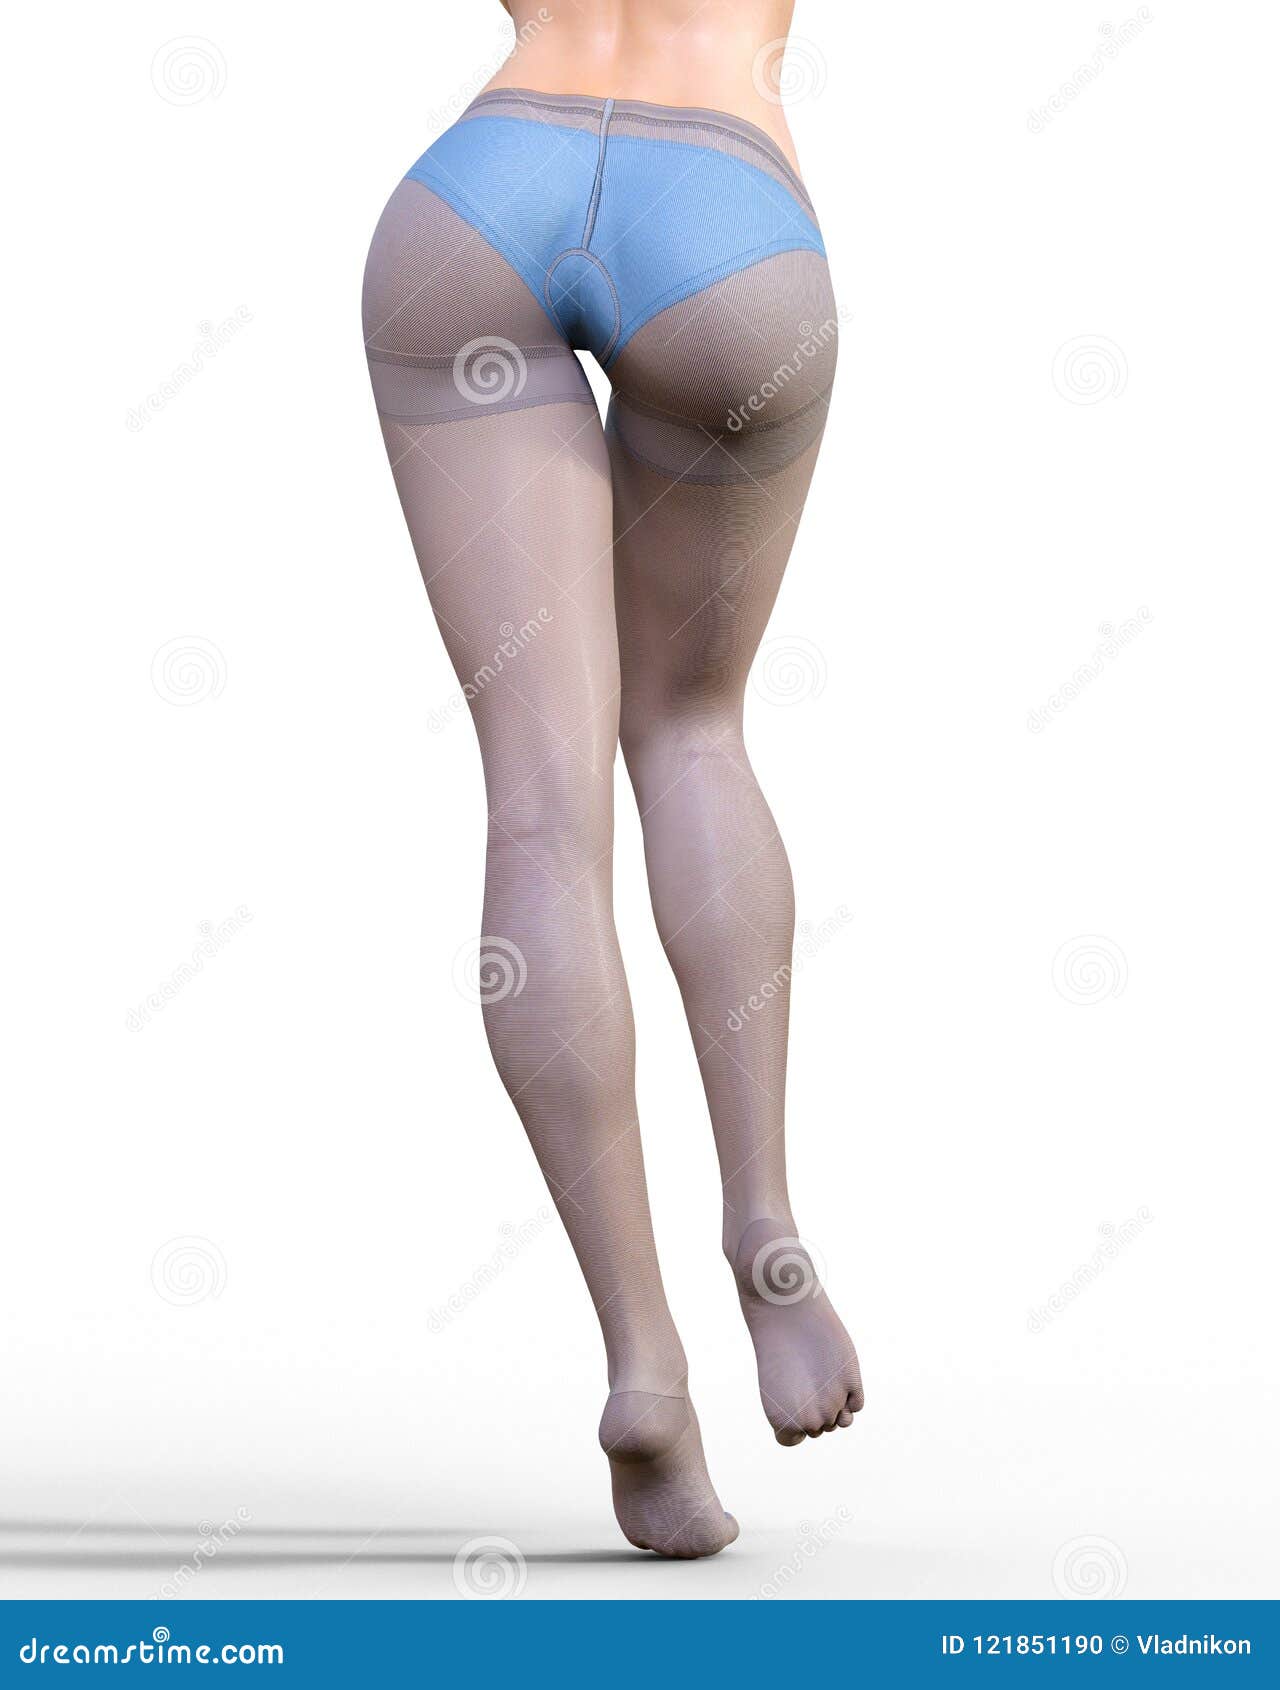 https://thumbs.dreamstime.com/z/beautiful-long-slender-sexy-female-legs-blue-panties-pantyhose-beautiful-underwear-collection-provocative-liberated-pose-d-121851190.jpg